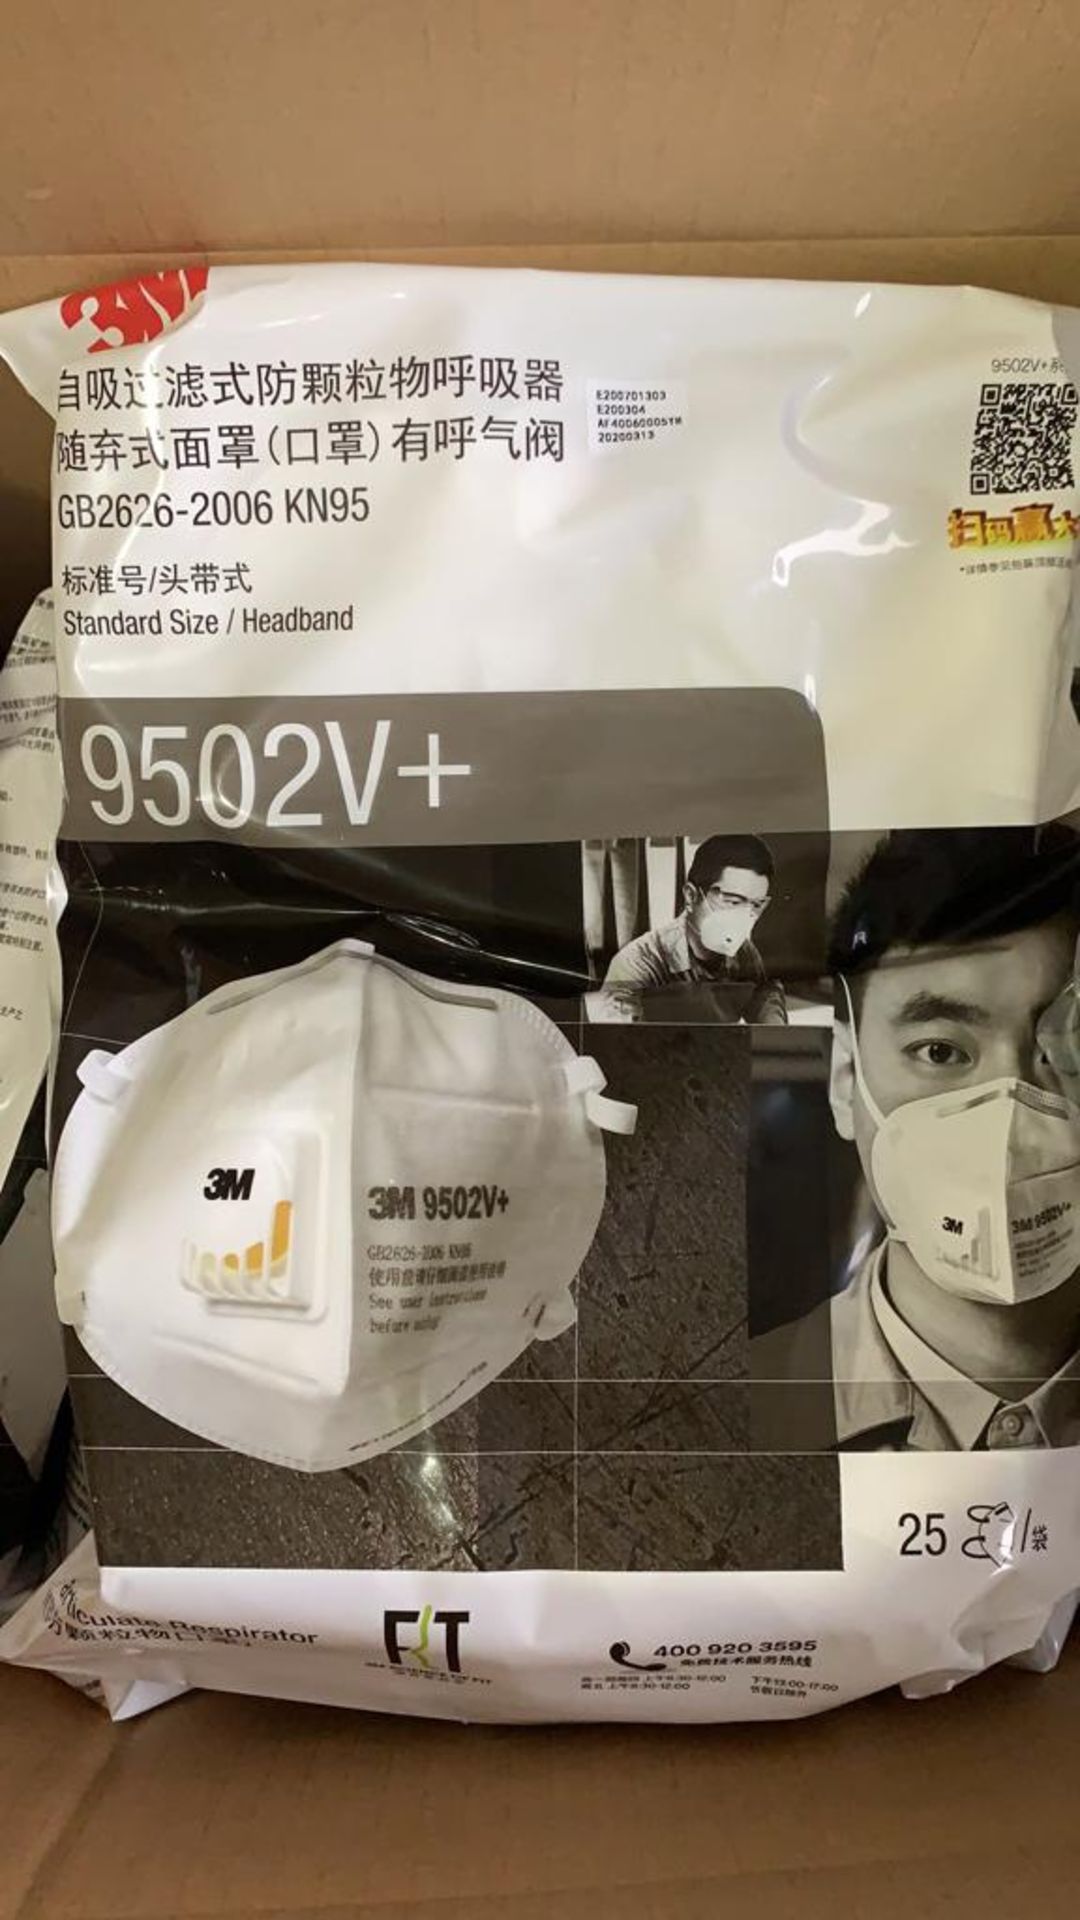 250x 3M 9502V+ Protective face mask with valve (headband fitting) 25 per bag, 10 bags pe